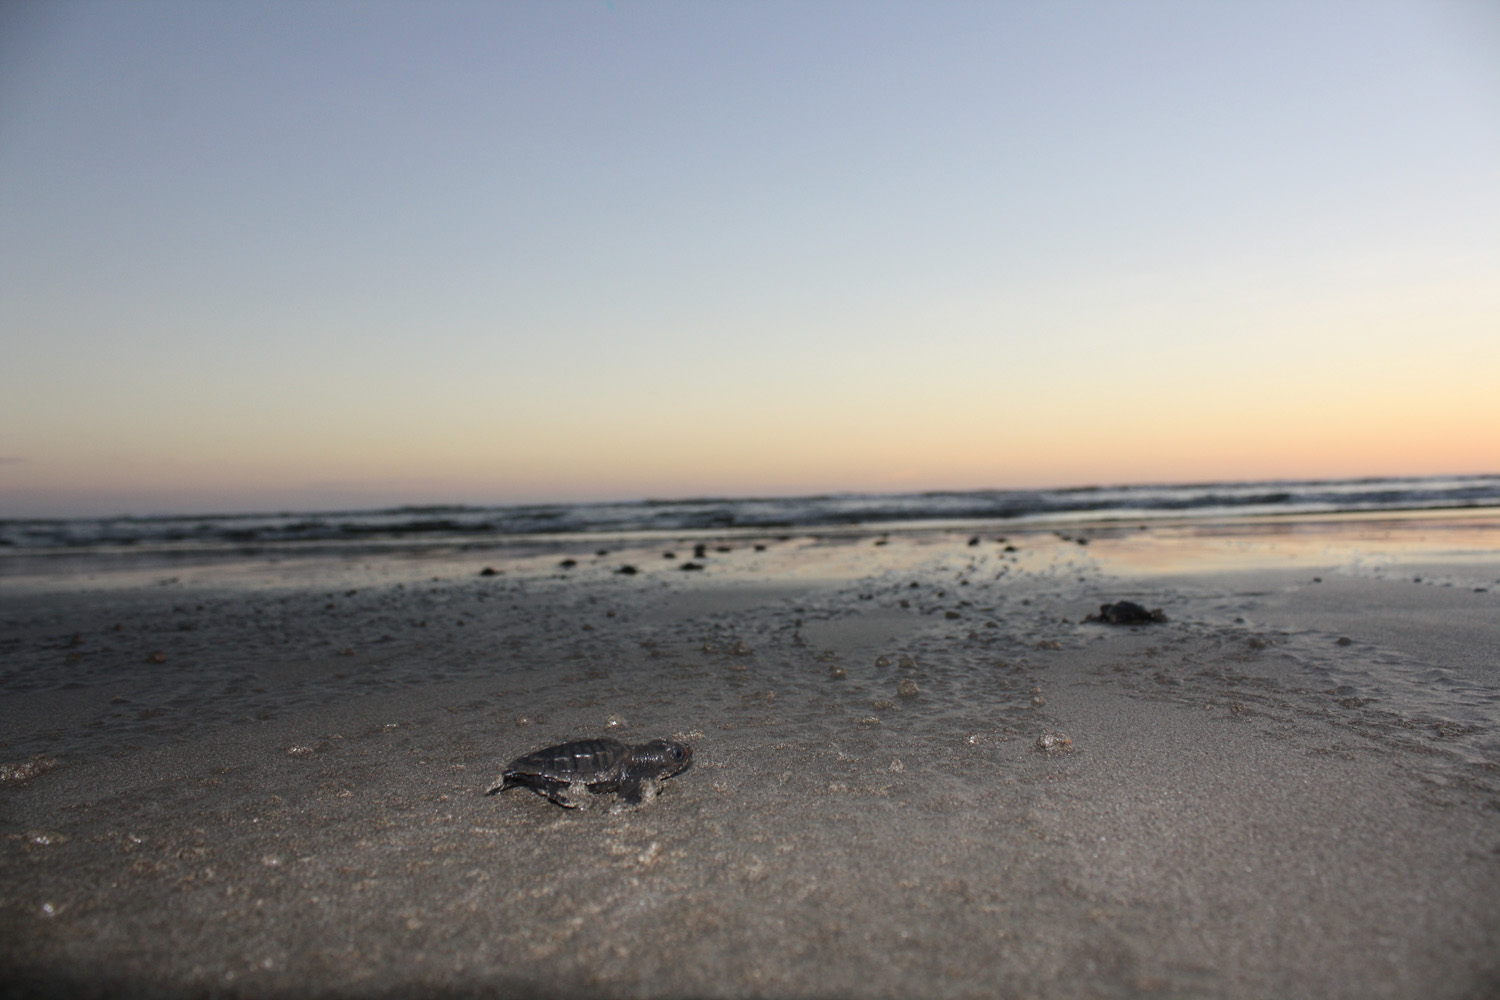 Day 5. Baby sea turtles heading towards the Pacific Ocean.